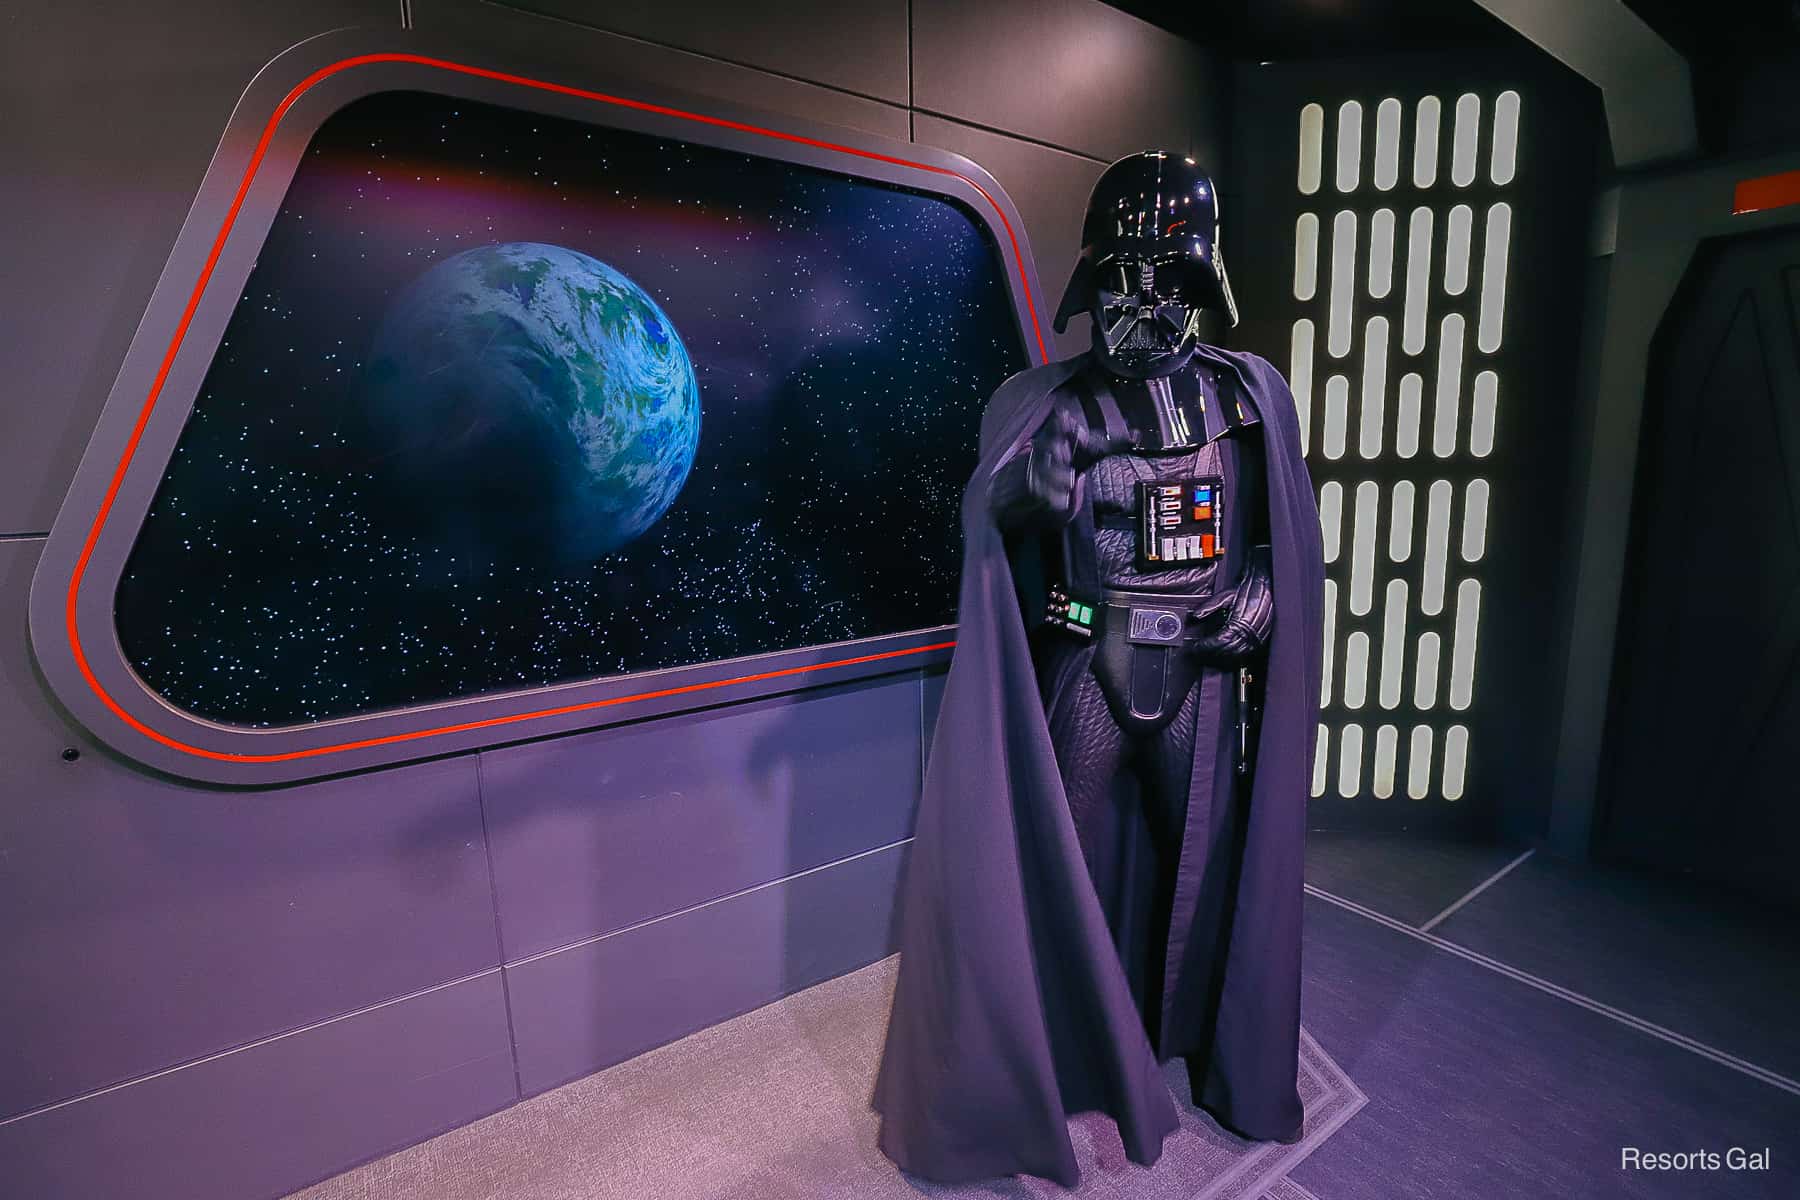 Darth Vader points as he's telling the next guest to enter his character meet. 